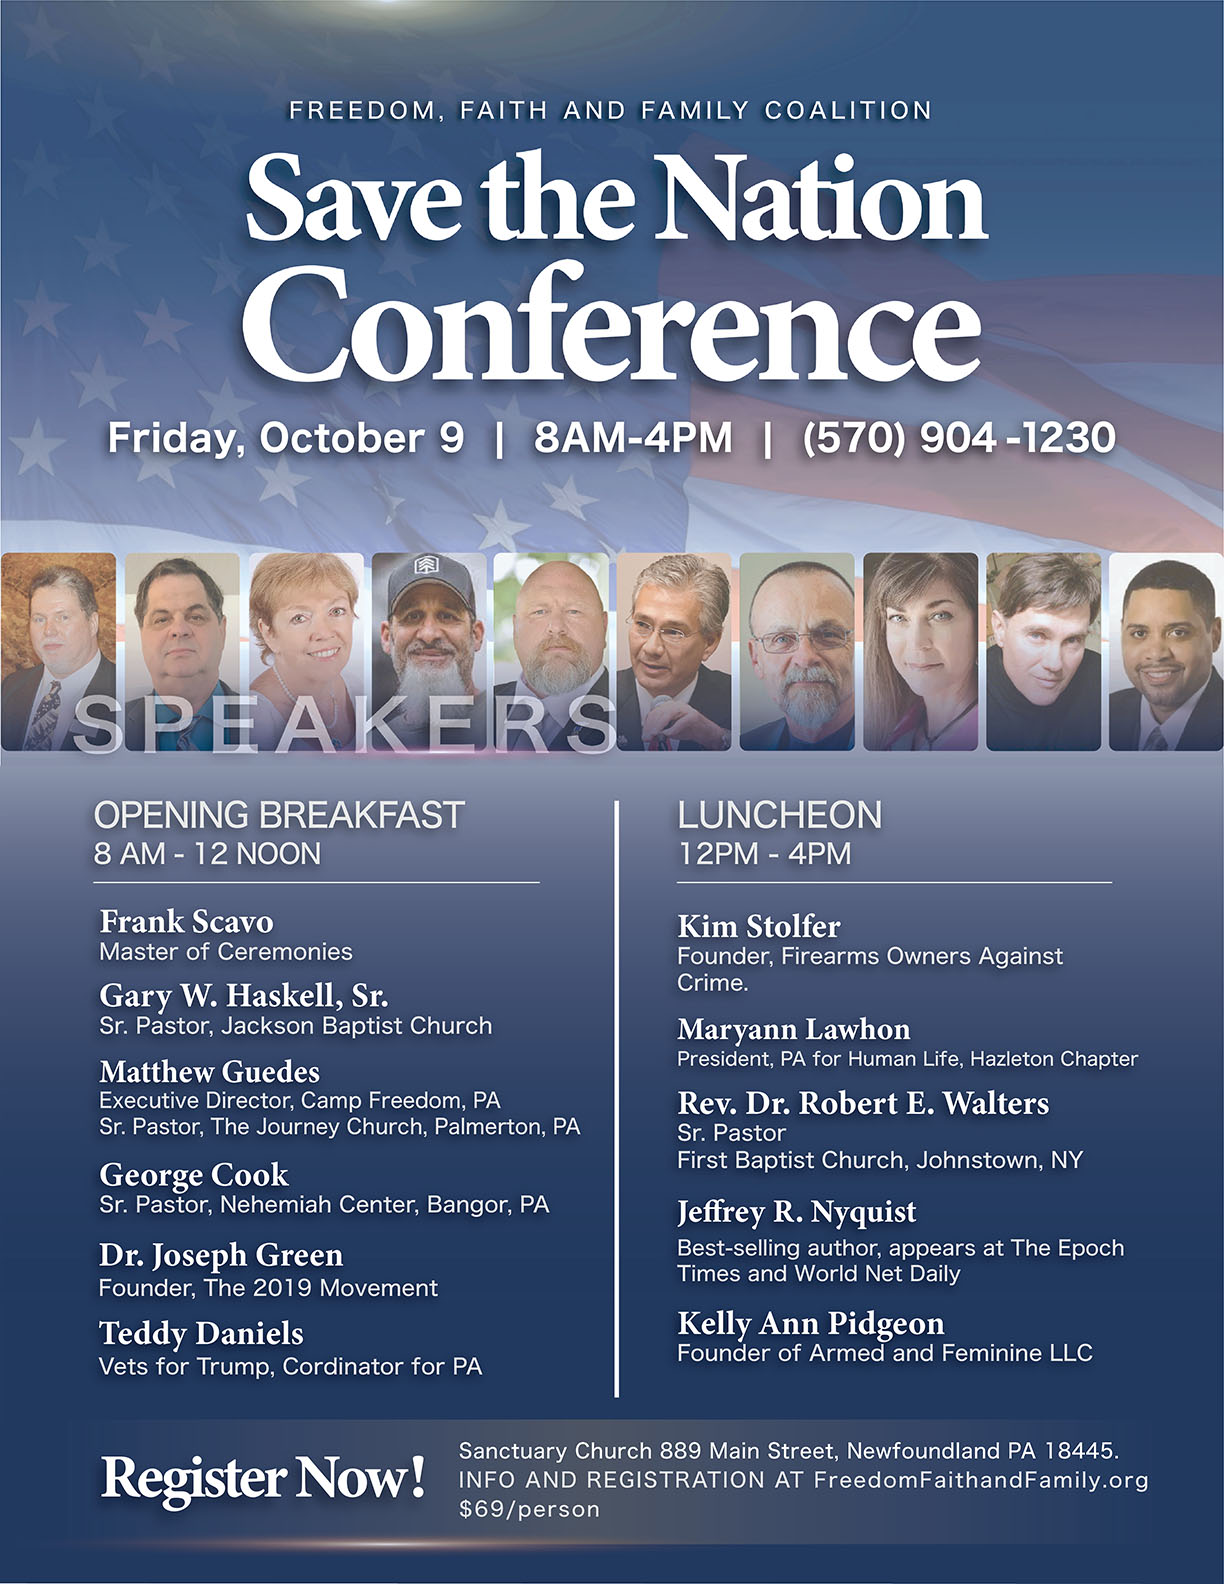 FFFC “Save the Nation” Conference - October 9, 2020 - Freedom, Faith and Family Coalition - We hold these truths to be self-evident